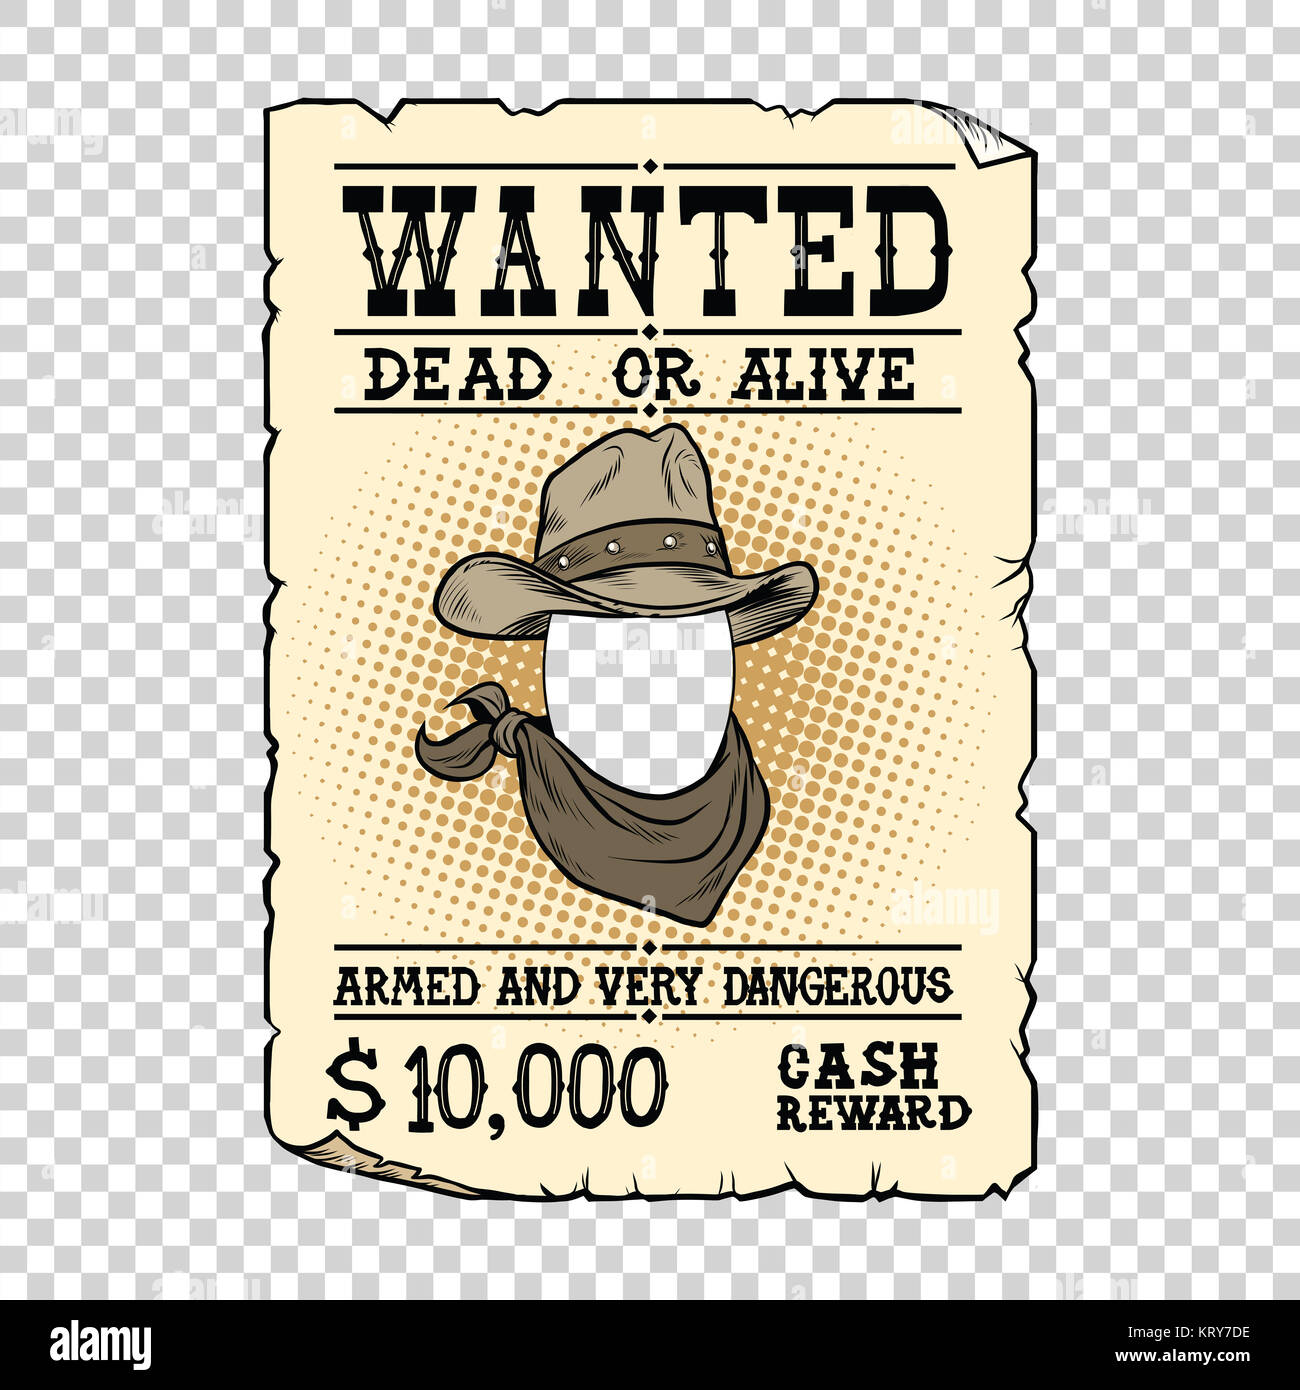 Western ad wanted dead or alive Stock Photo